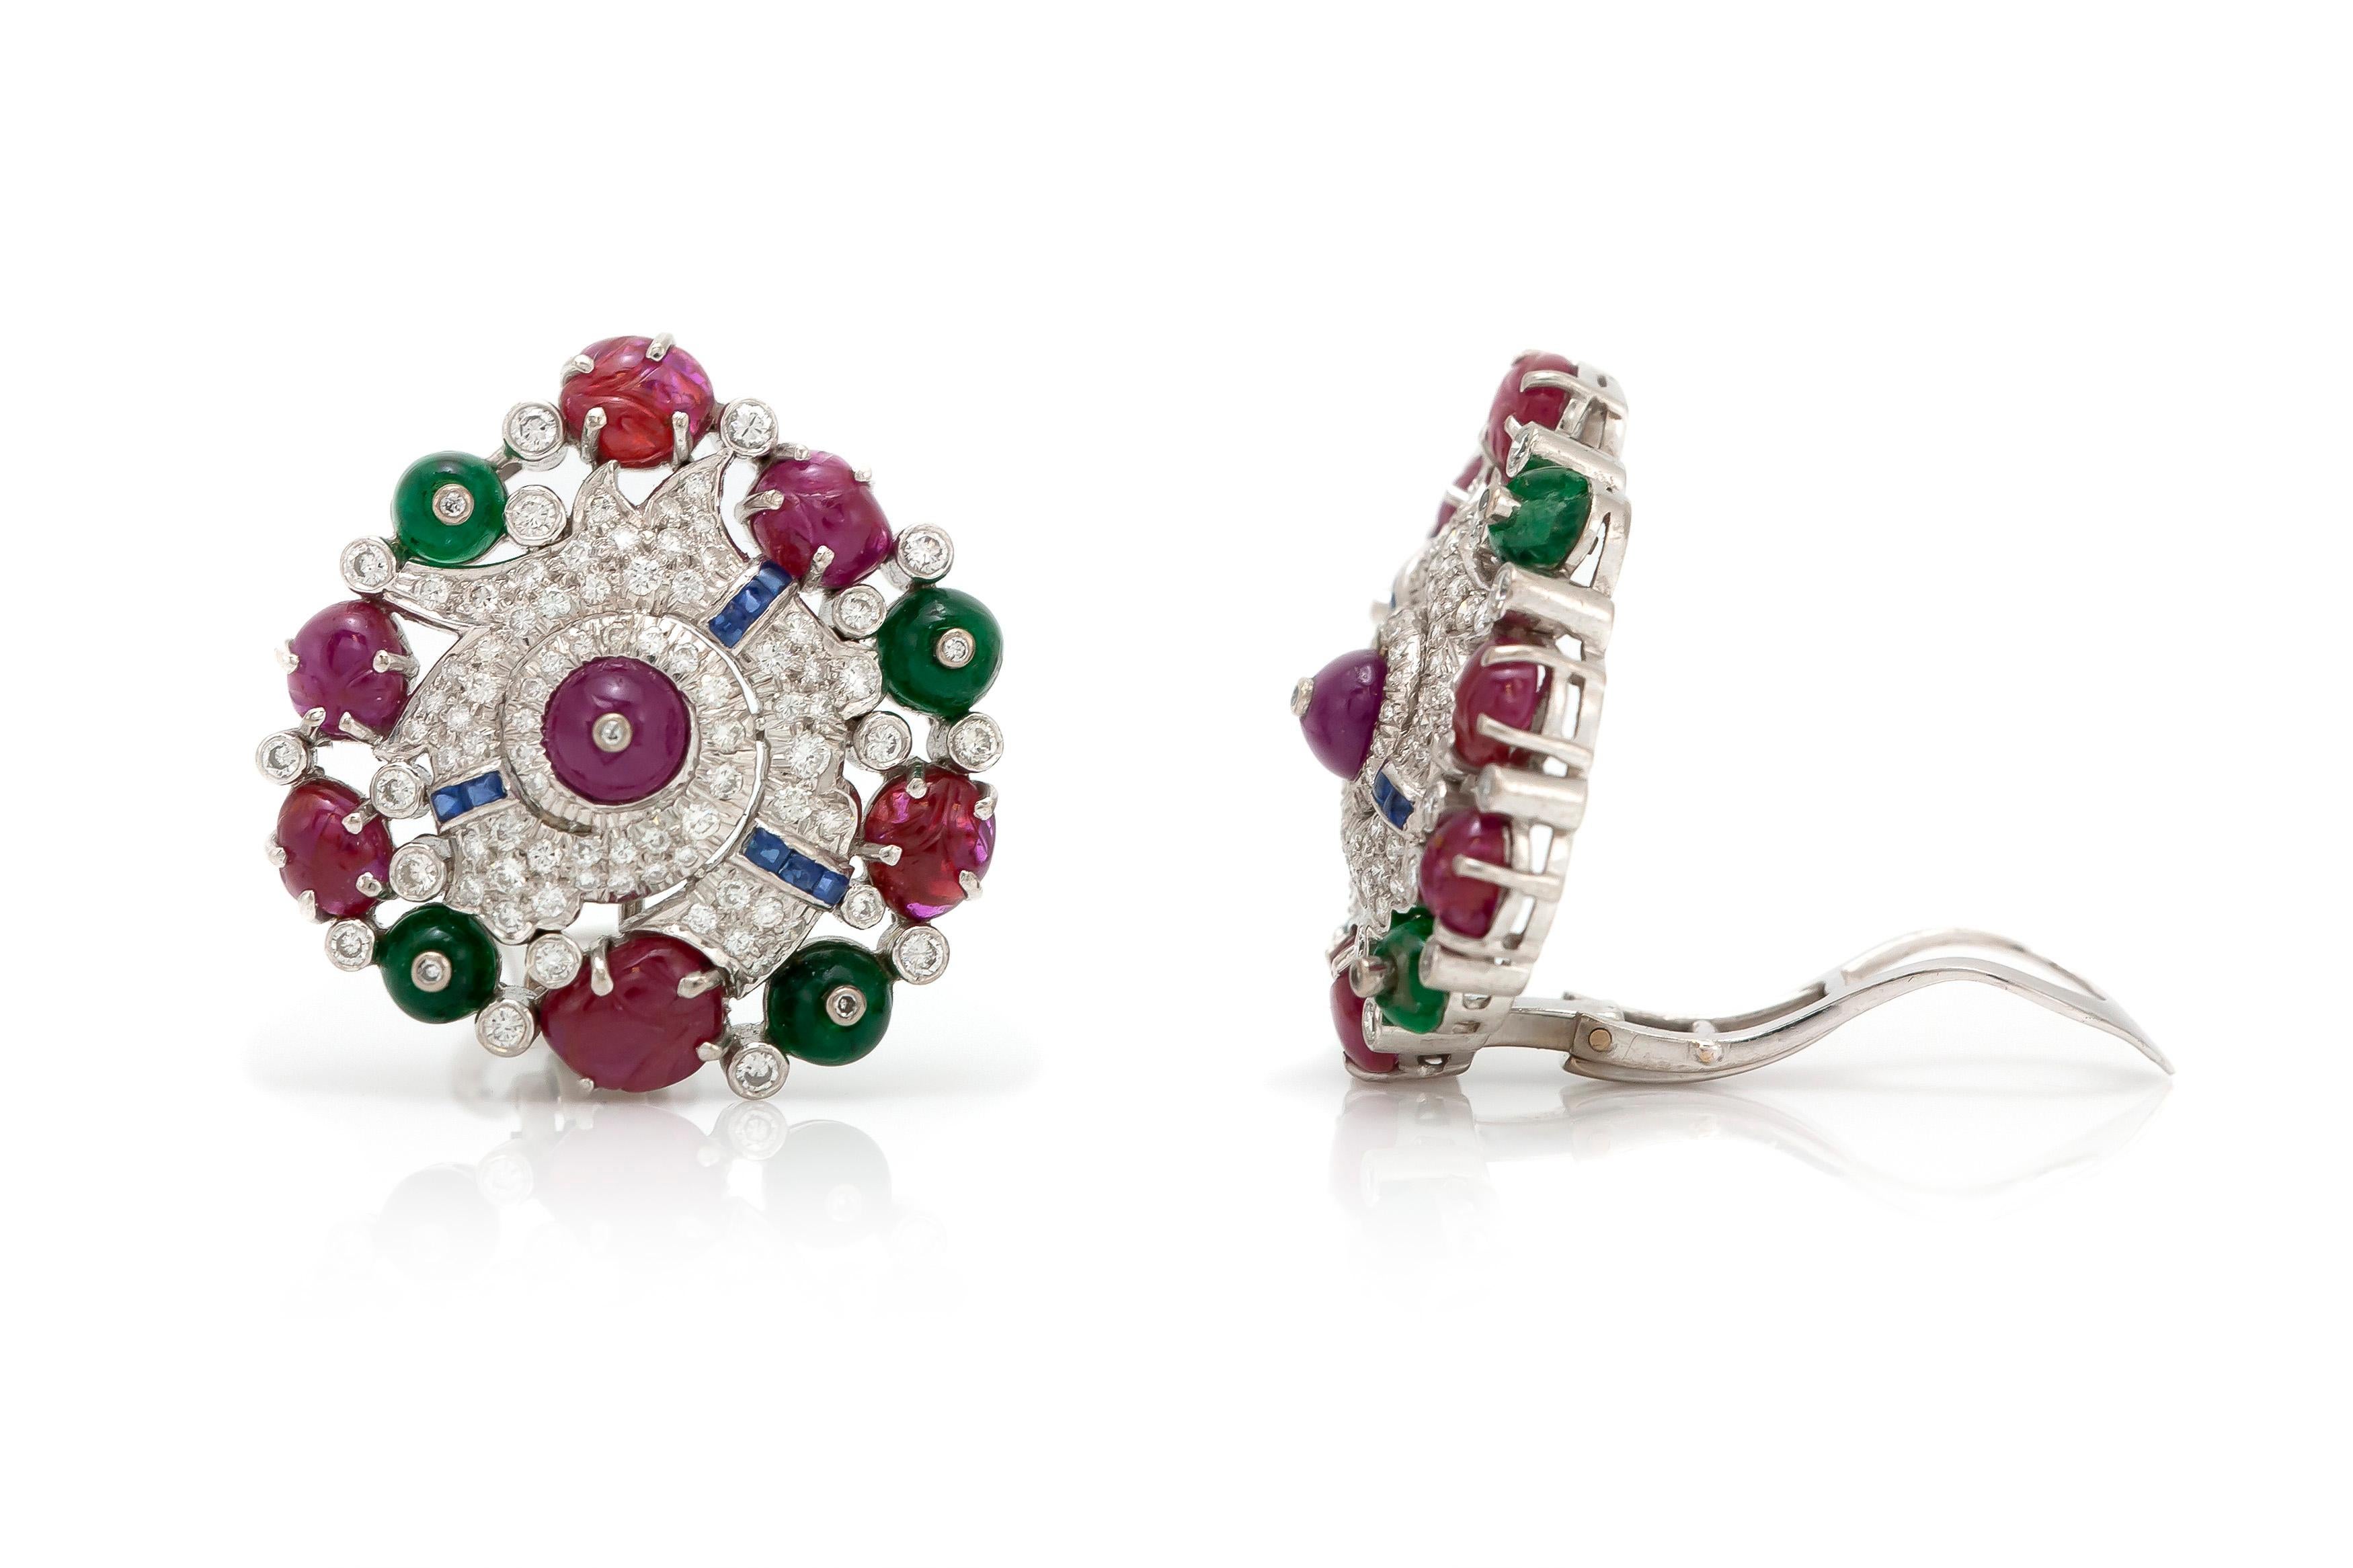 The earrings is finely crafted in 18k white gold with diamonds weighing approximately totaal of 4.00 carat ,ruby weighing approximately total of 4.90, emeralds weighing approximately total of 2.40 carat and sapphire weighing approximately total of